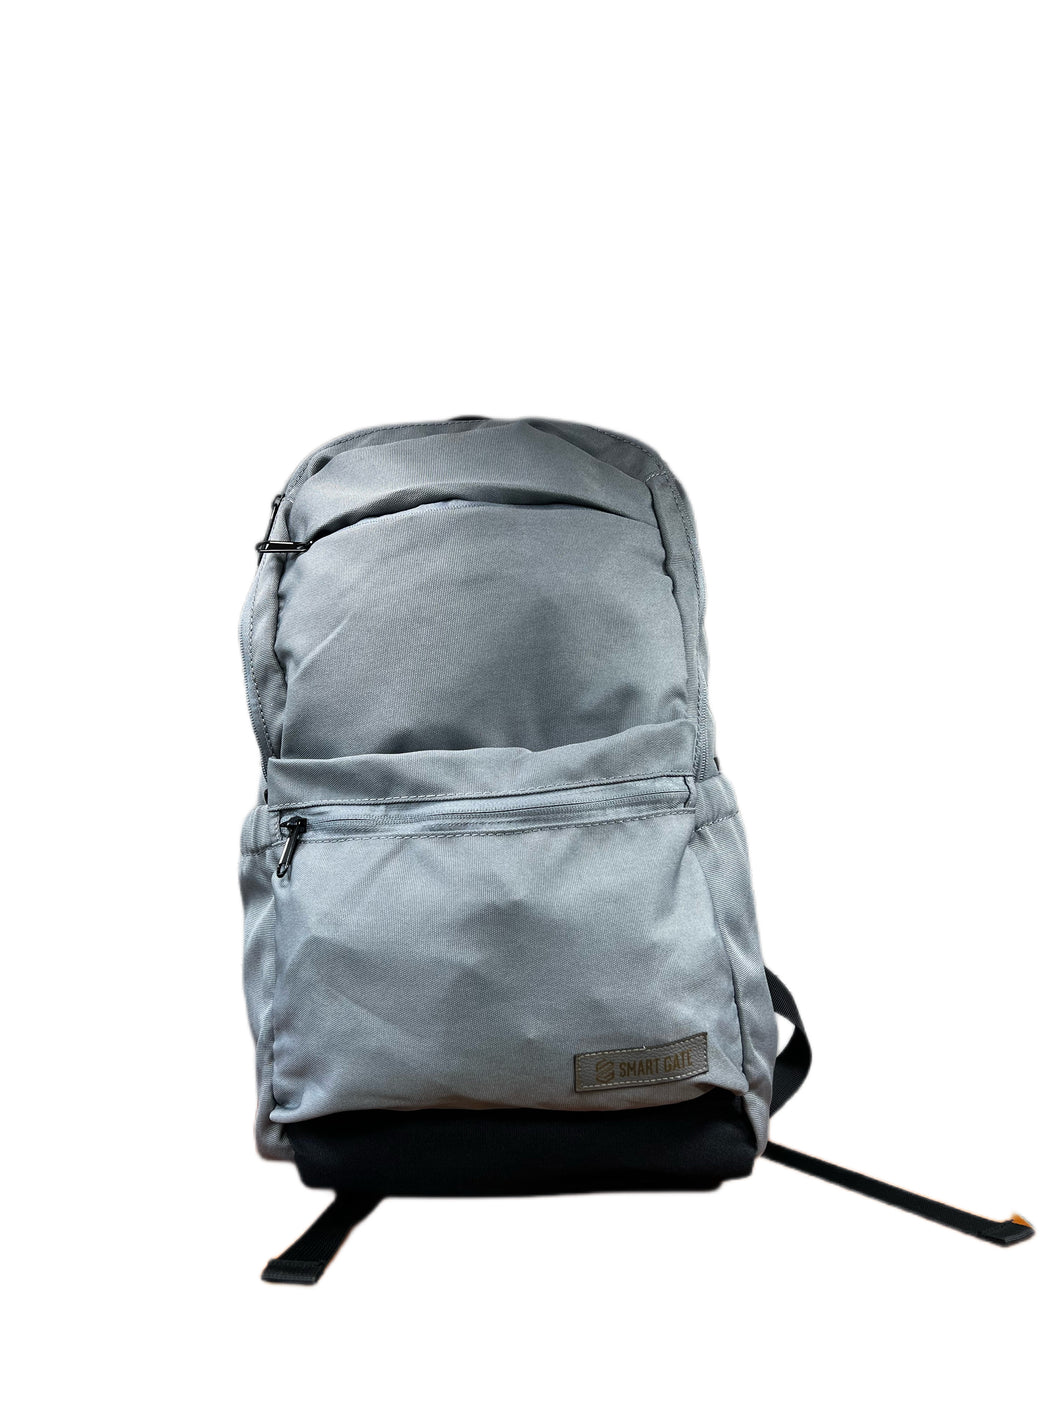 Waterproof bag for laptop up to 15.6’’